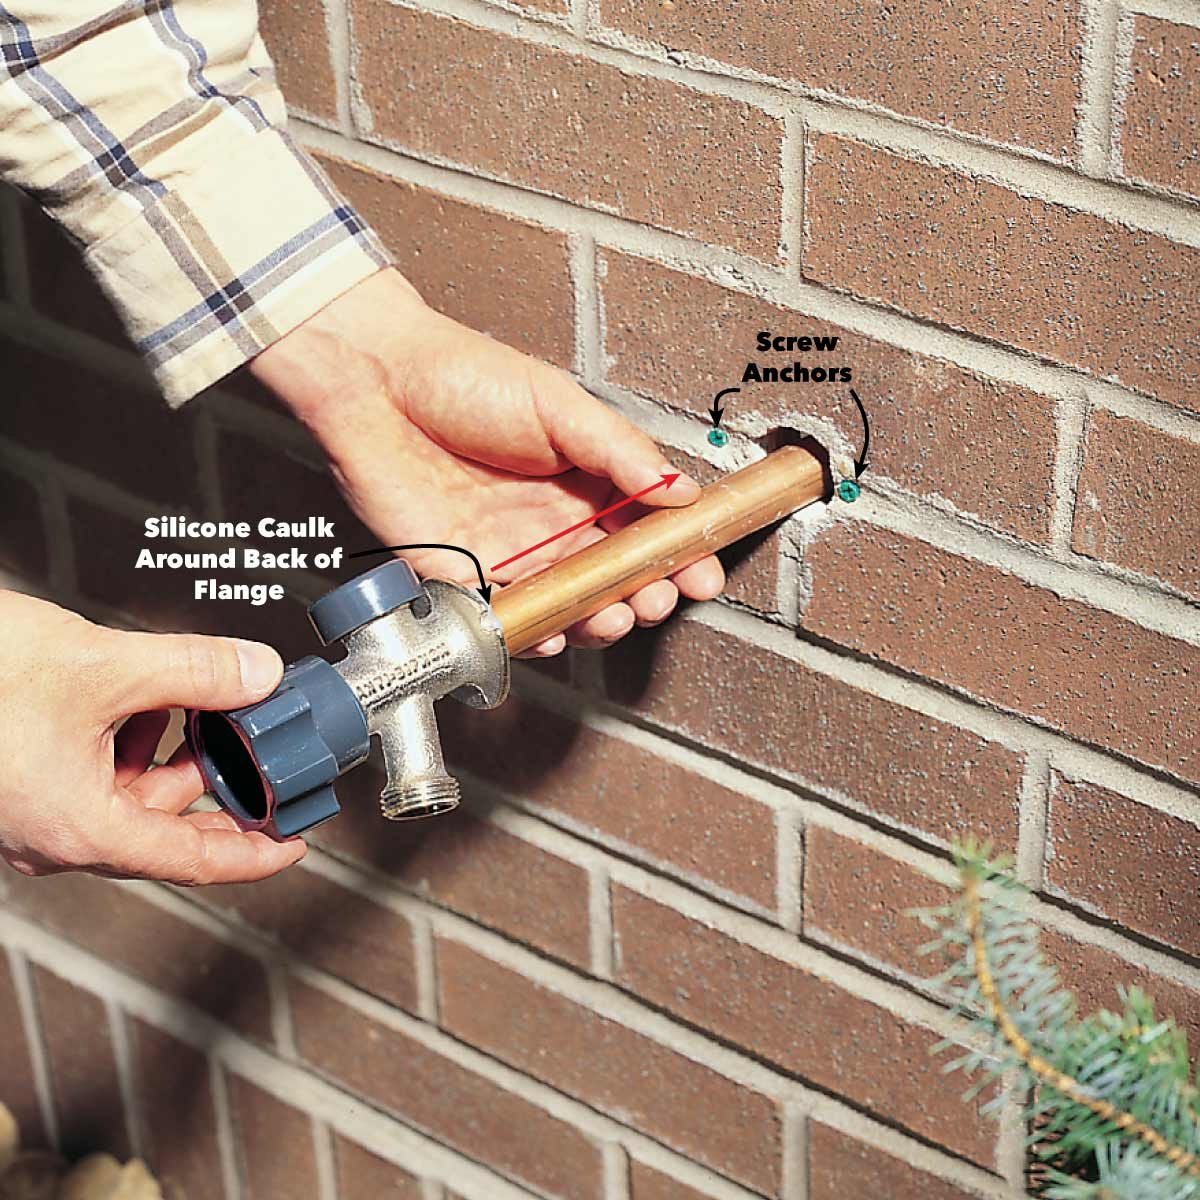 How To Install A Frost Proof Outdoor Faucet The Family Handyman